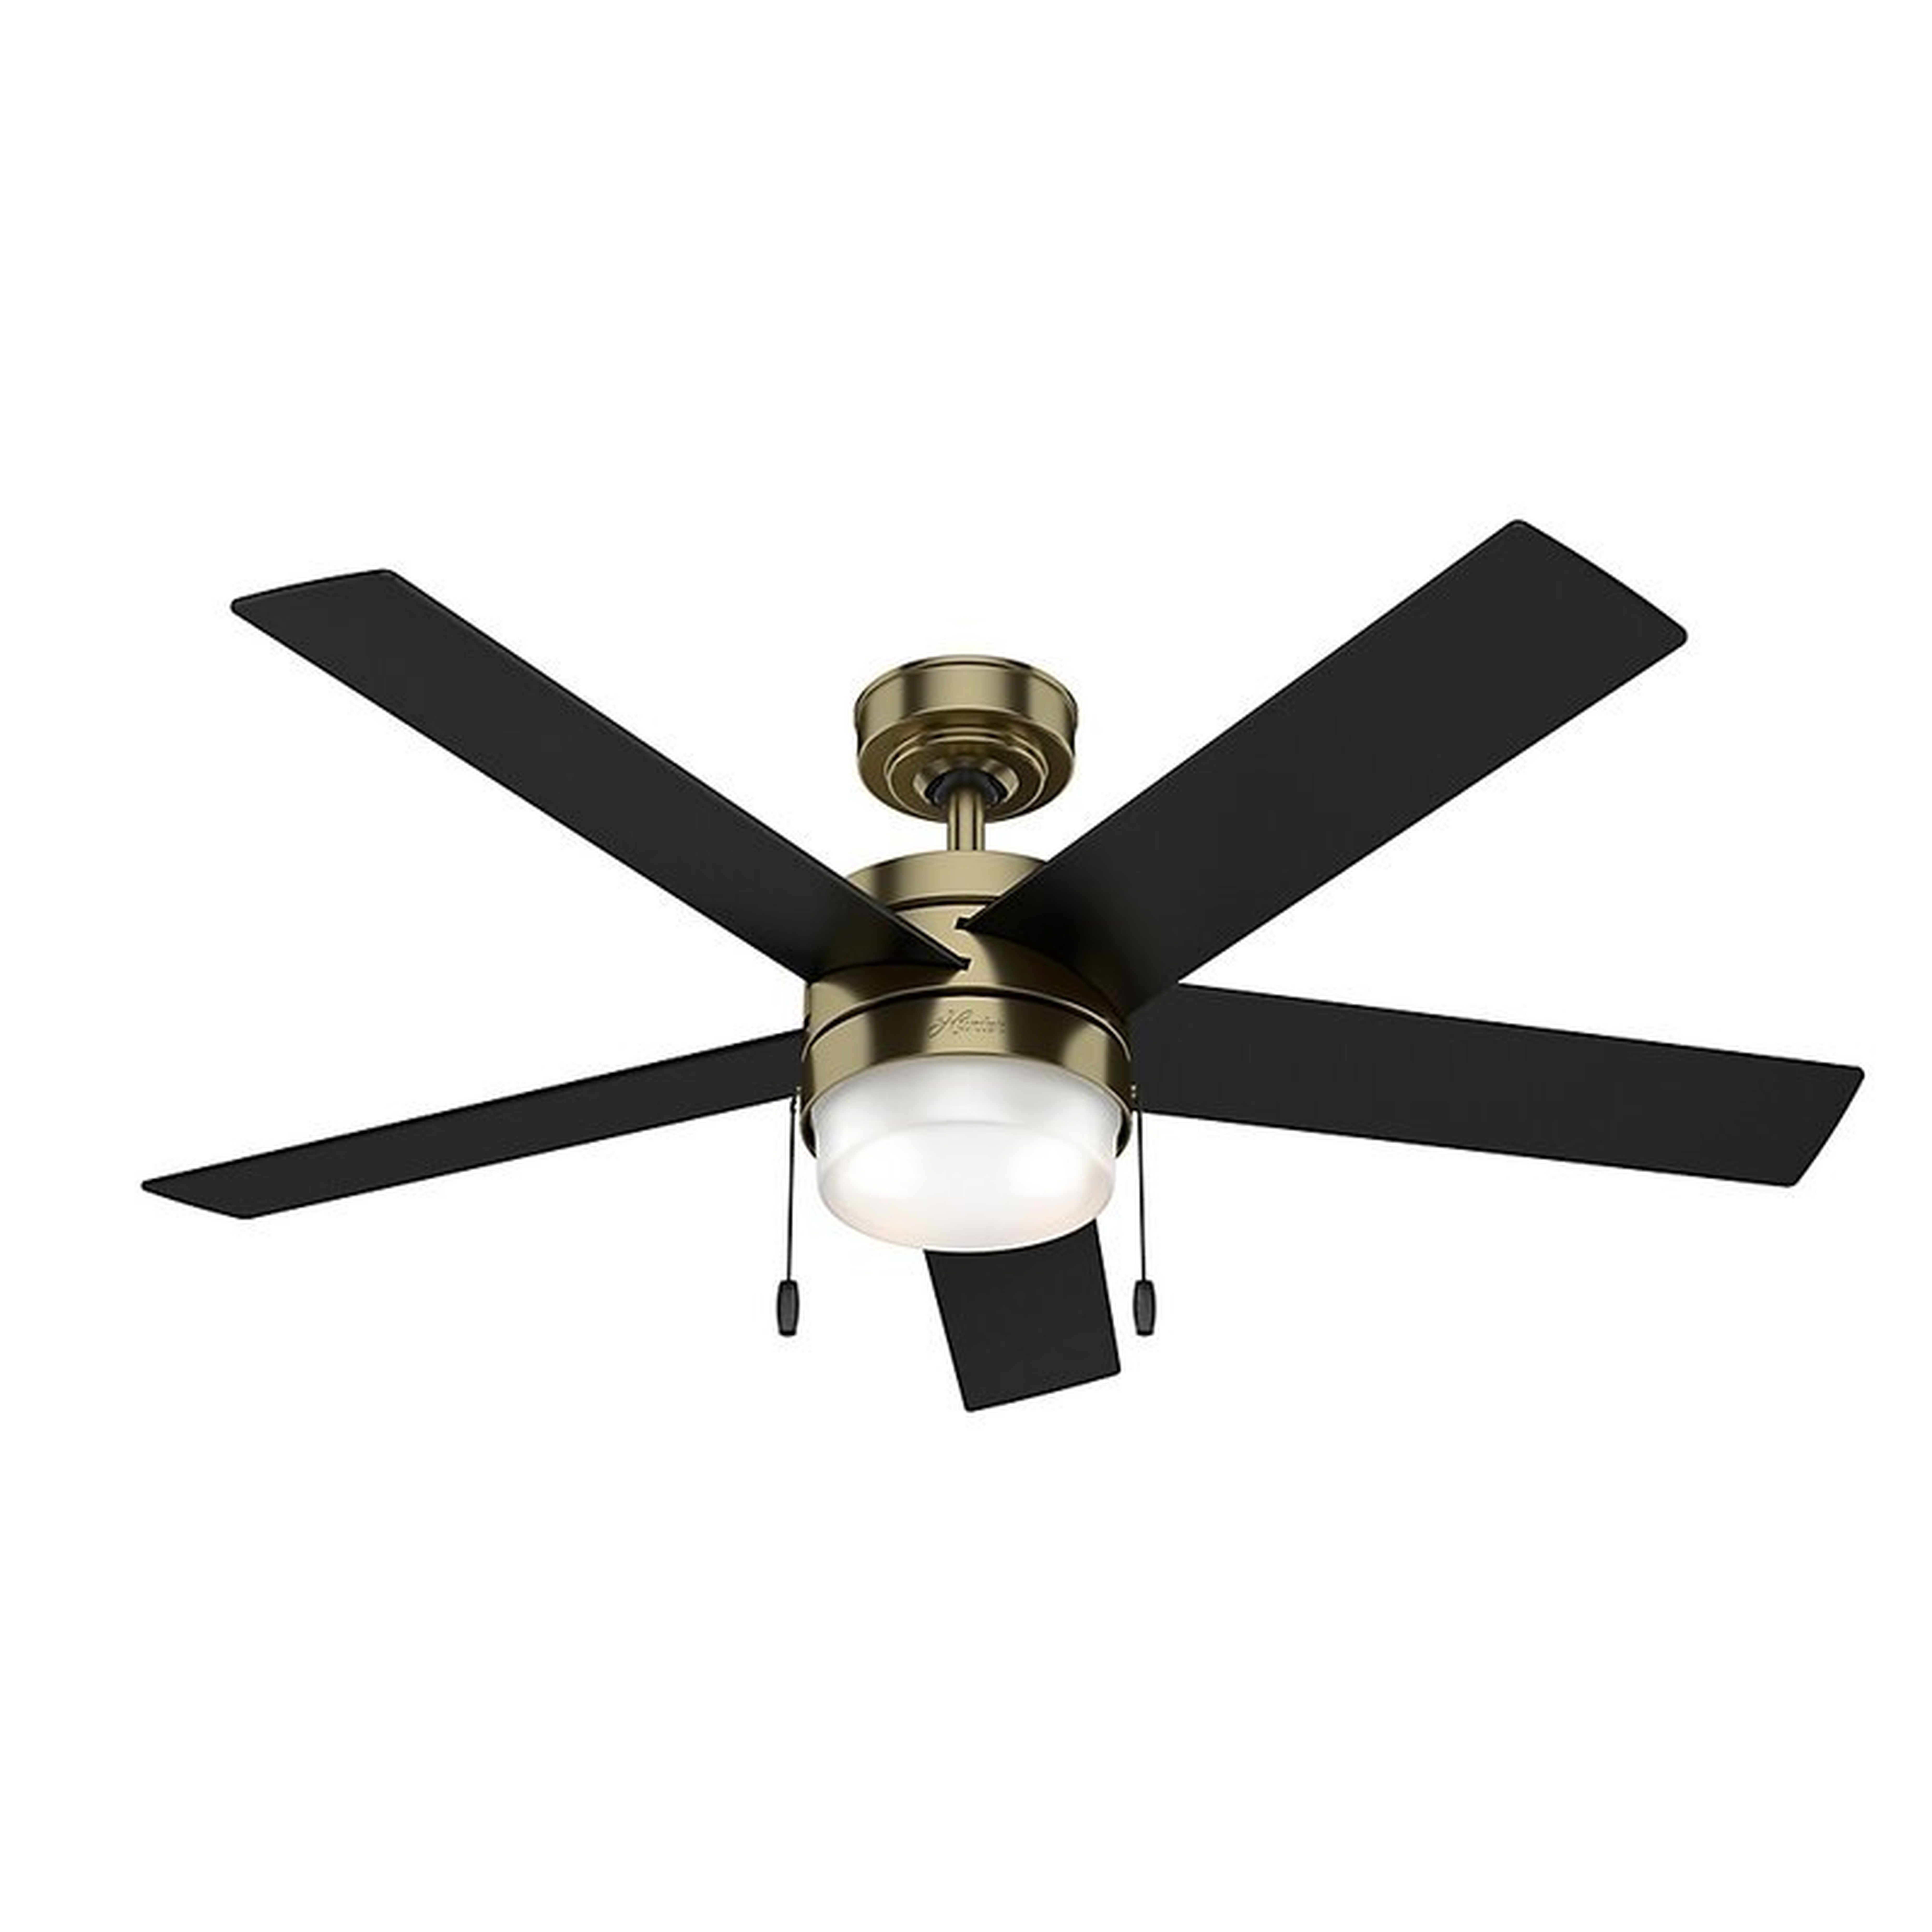 52" Claudette 5 - Blade LED Standard Ceiling Fan with Pull Chain and Light Kit Included   52" Claudette 5 - Blade LED Standard Ceiling Fan with Pull Chain and Light Kit Included  52" Claudette 5 - Blade LED Standard Ceiling Fan with Pull Chain and Light K - Wayfair